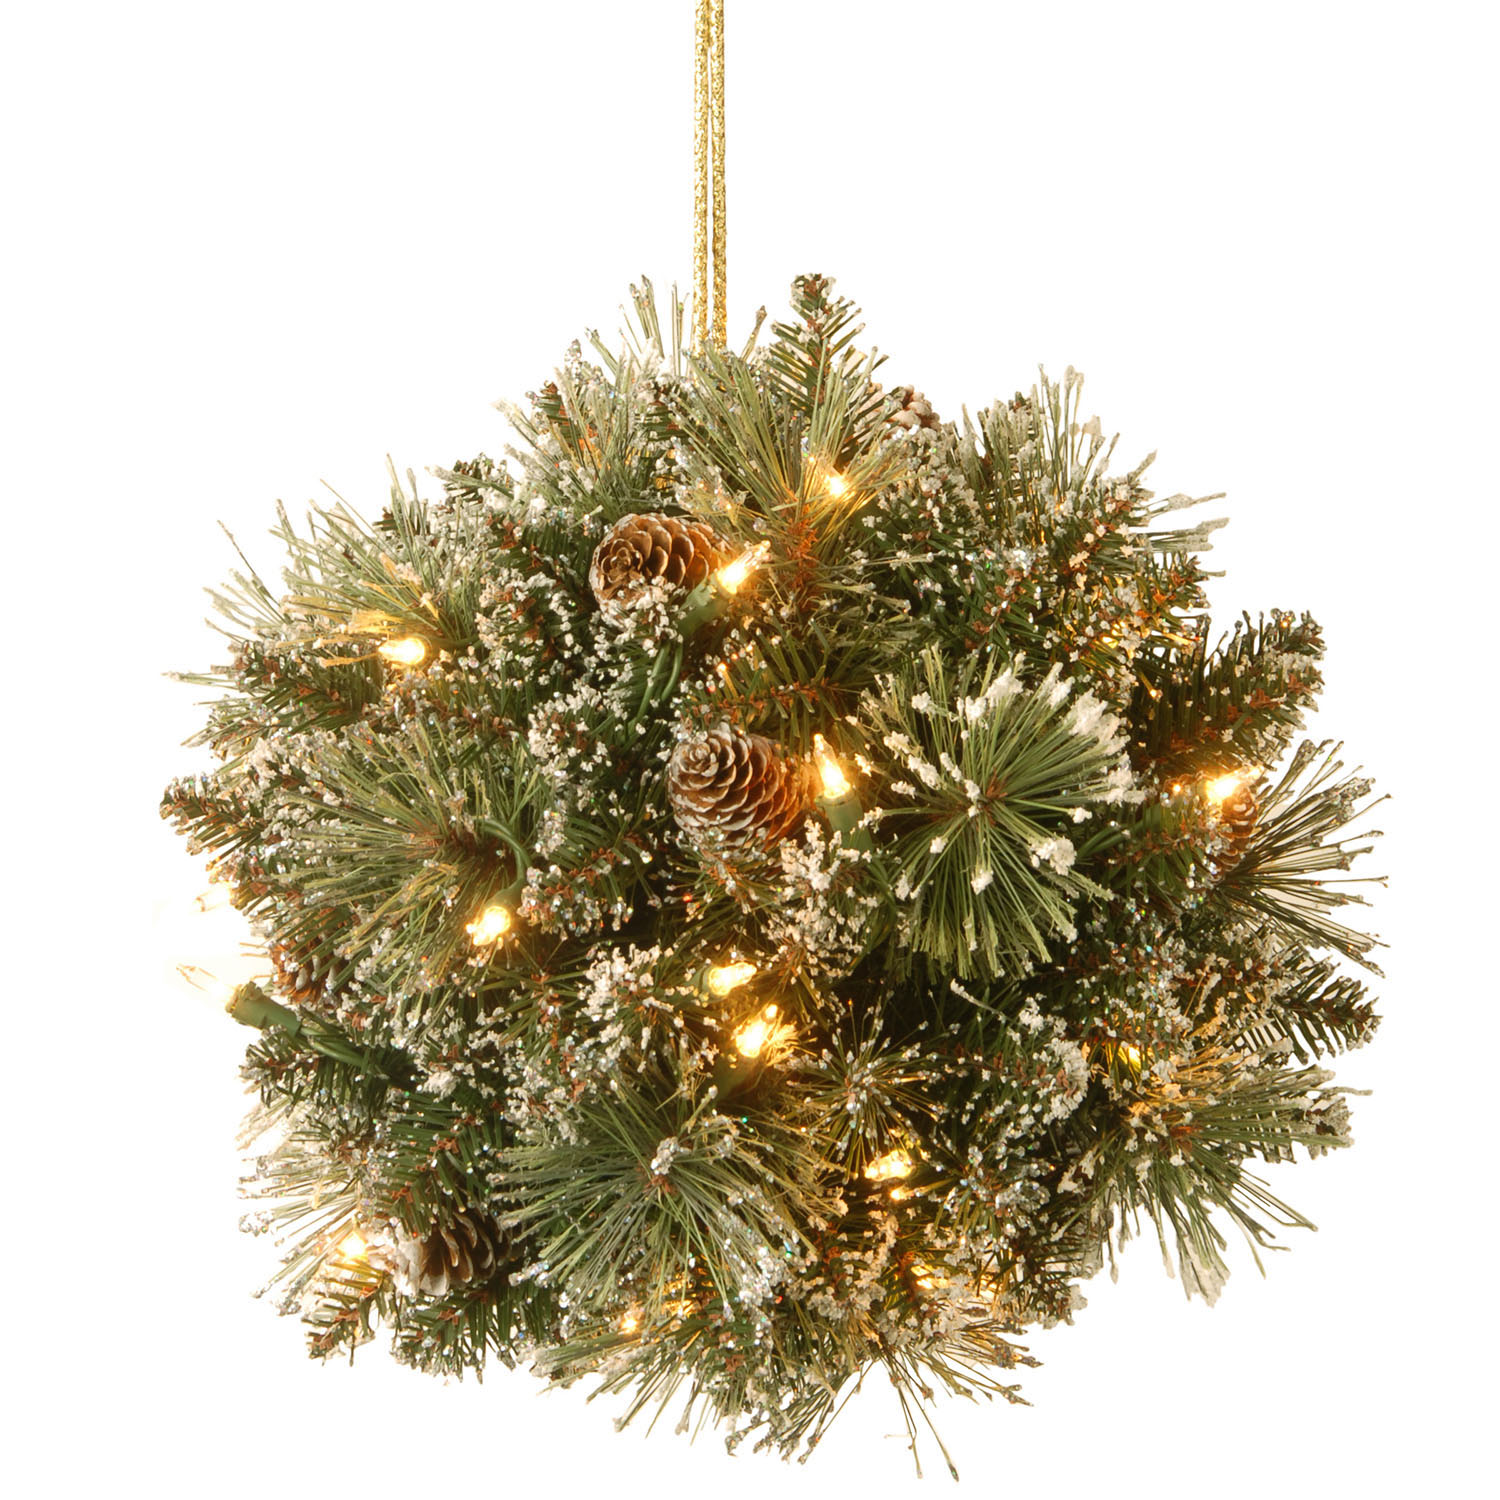 12 Inch Glittery Bristle Pine Kissing Ball: Battery/timer Operated Leds